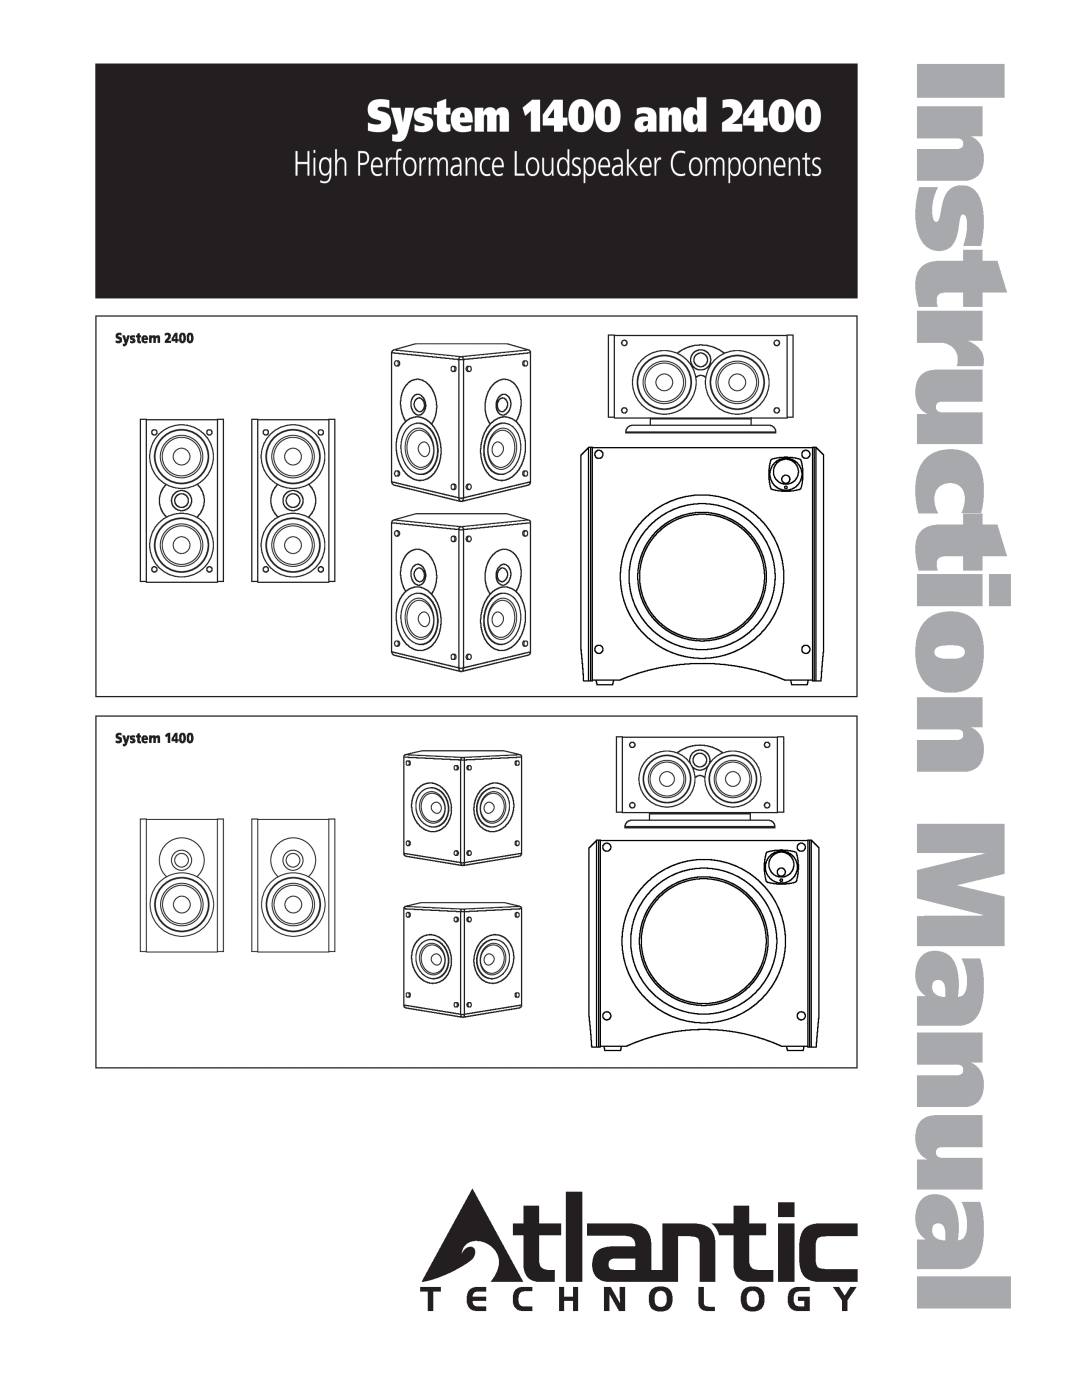 Atlantic Technology 2400 instruction manual System 1400 and, High Performance Loudspeaker Components 